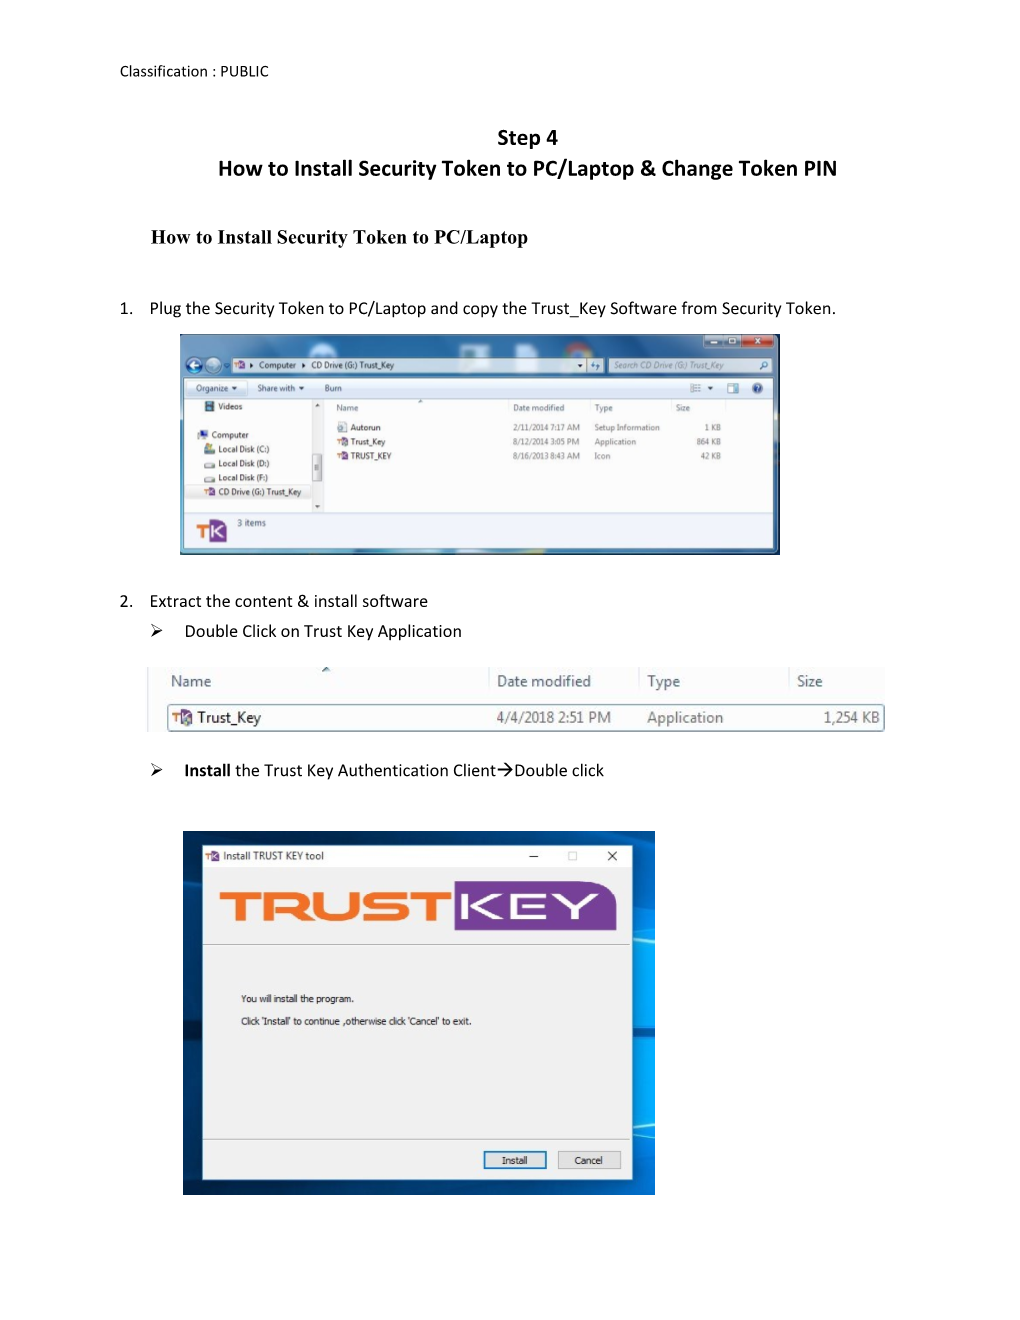 Step 4 How to Install Security Token to PC/Laptop & Change Token